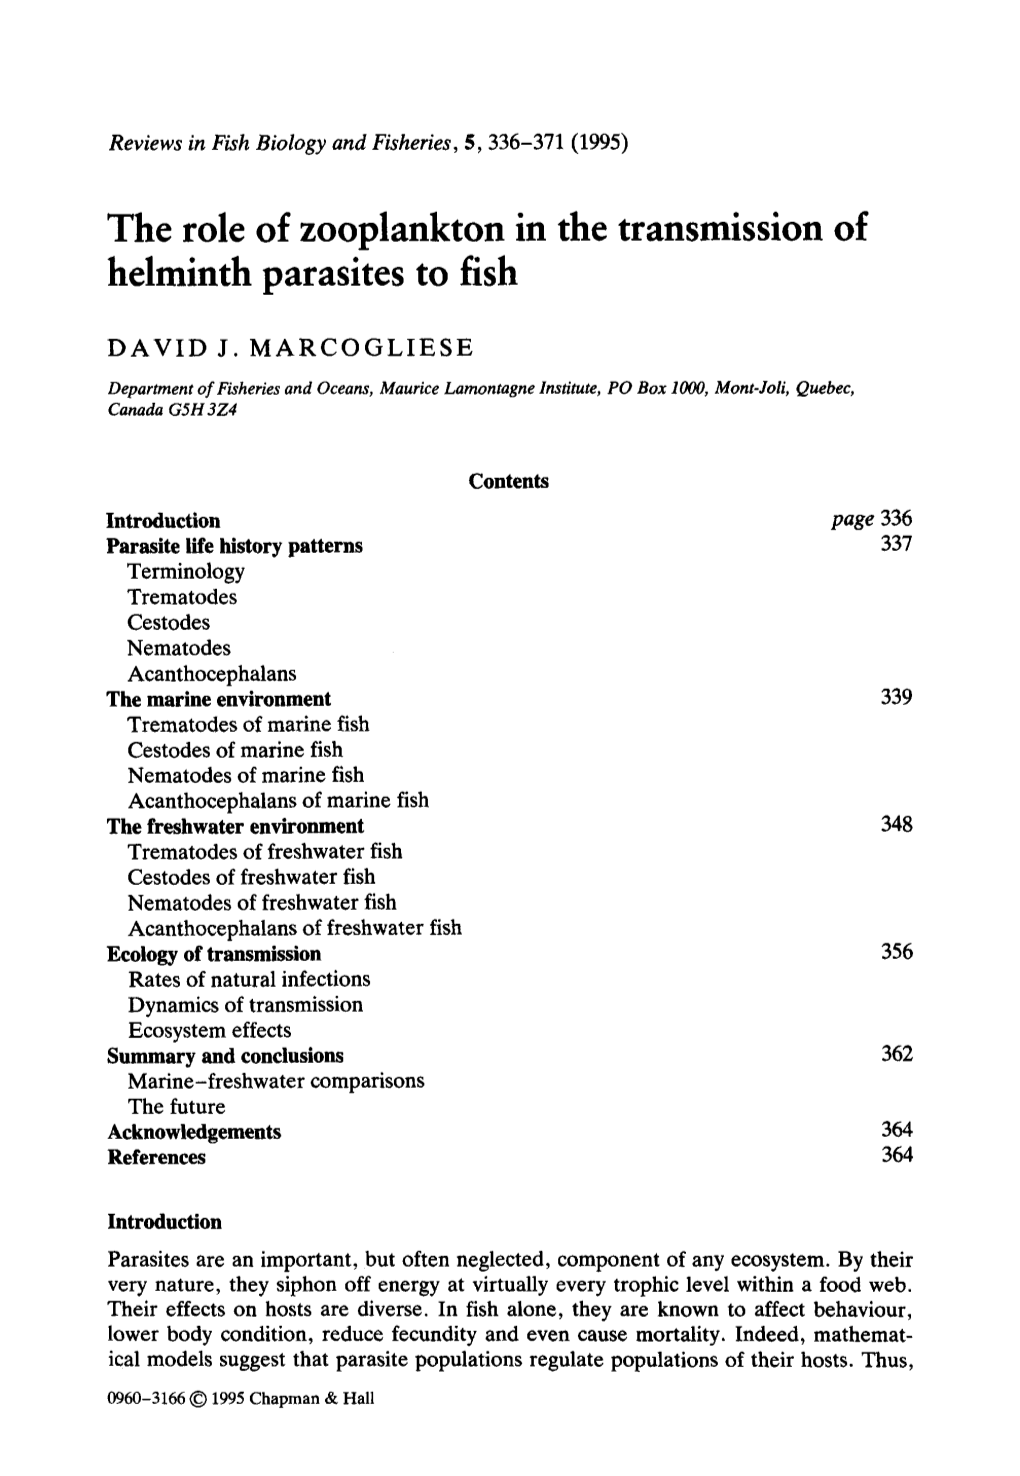 The Role of Zooplankton in the Transmission of Helminth Parasites to Fish